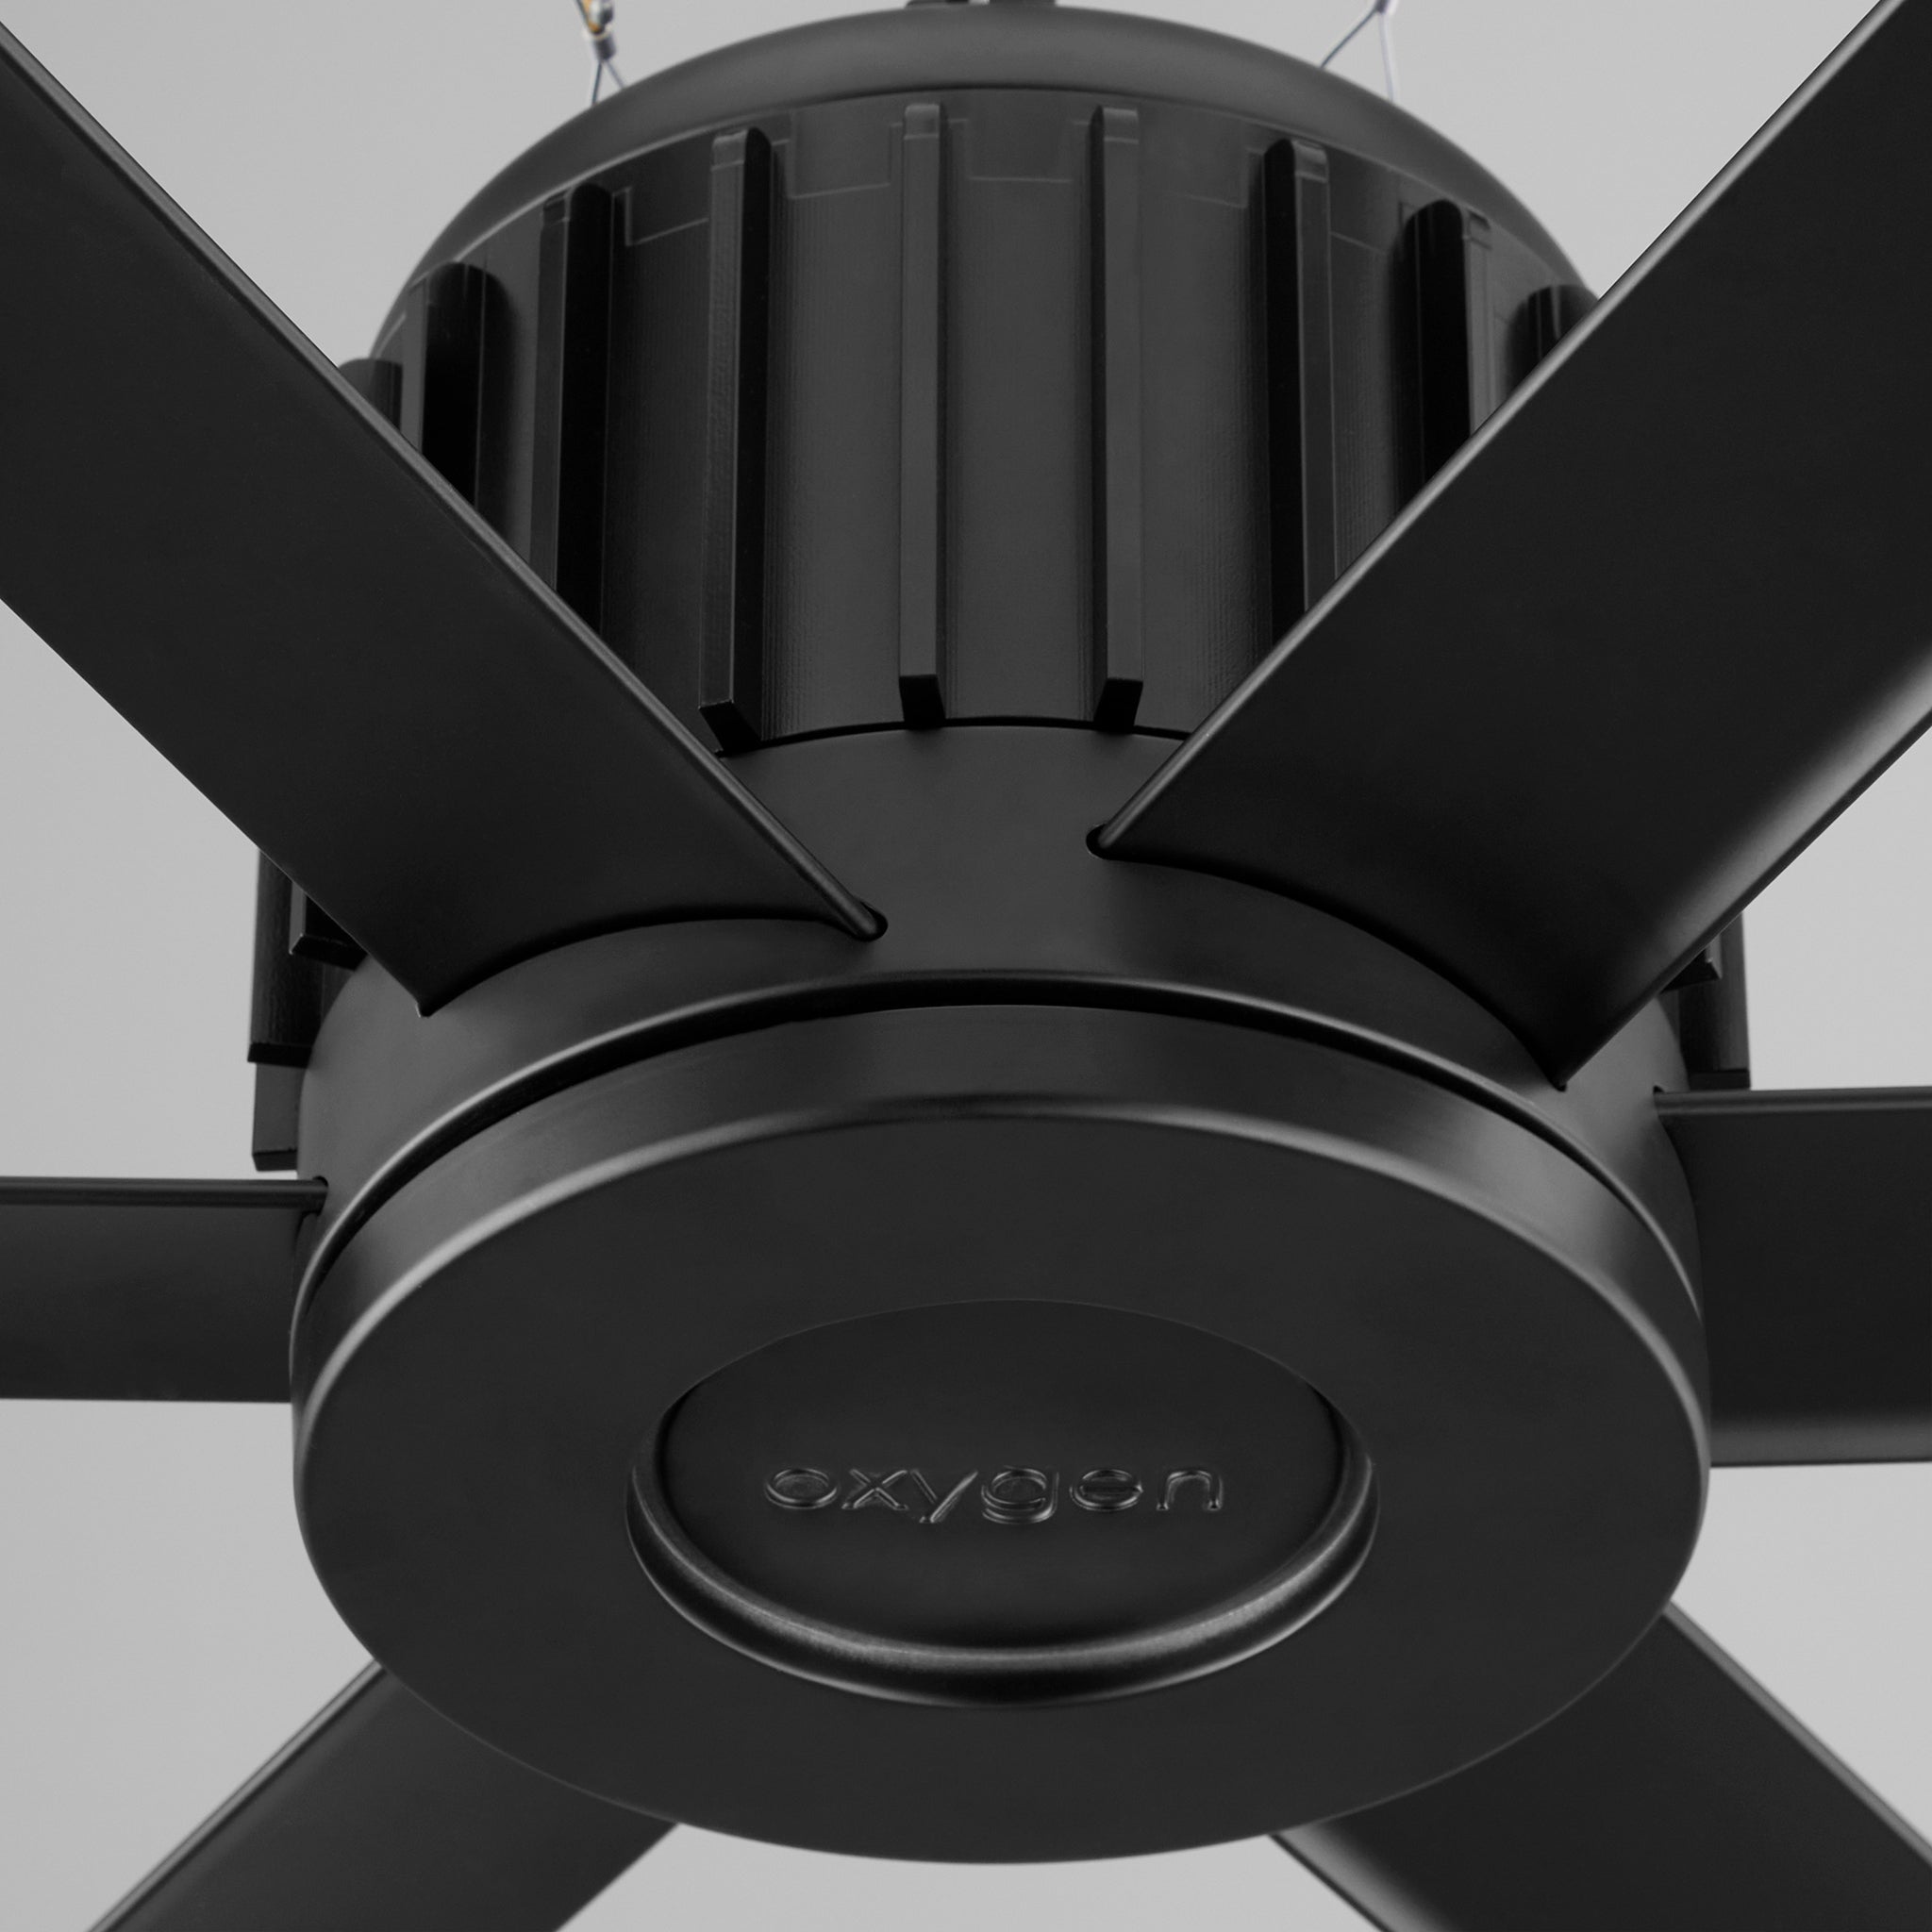 Oxygen ENORME 78 Inch Large Outdoor Ceiling Fan with Remote, Optional LED Light Kit, Wet Rated